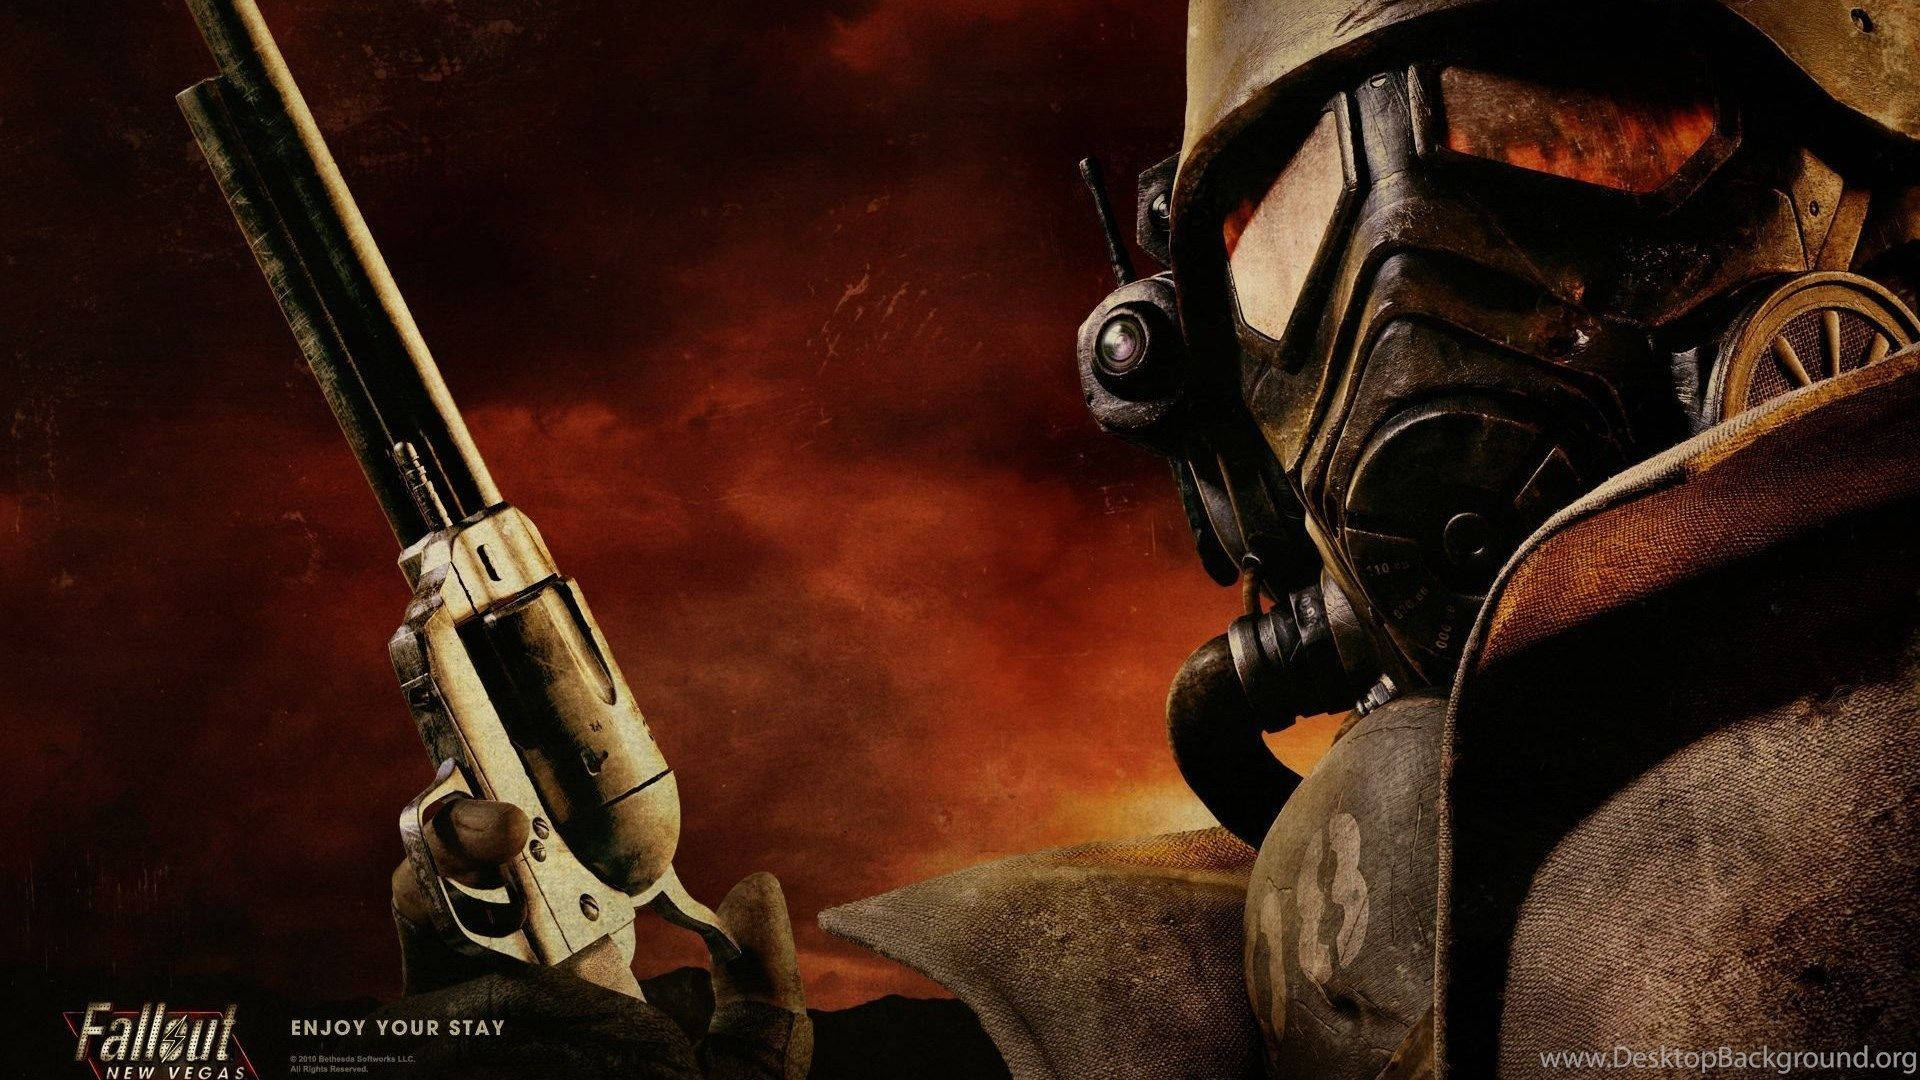 Brave the wasteland as the Courier in Fallout: New Vegas Wallpaper